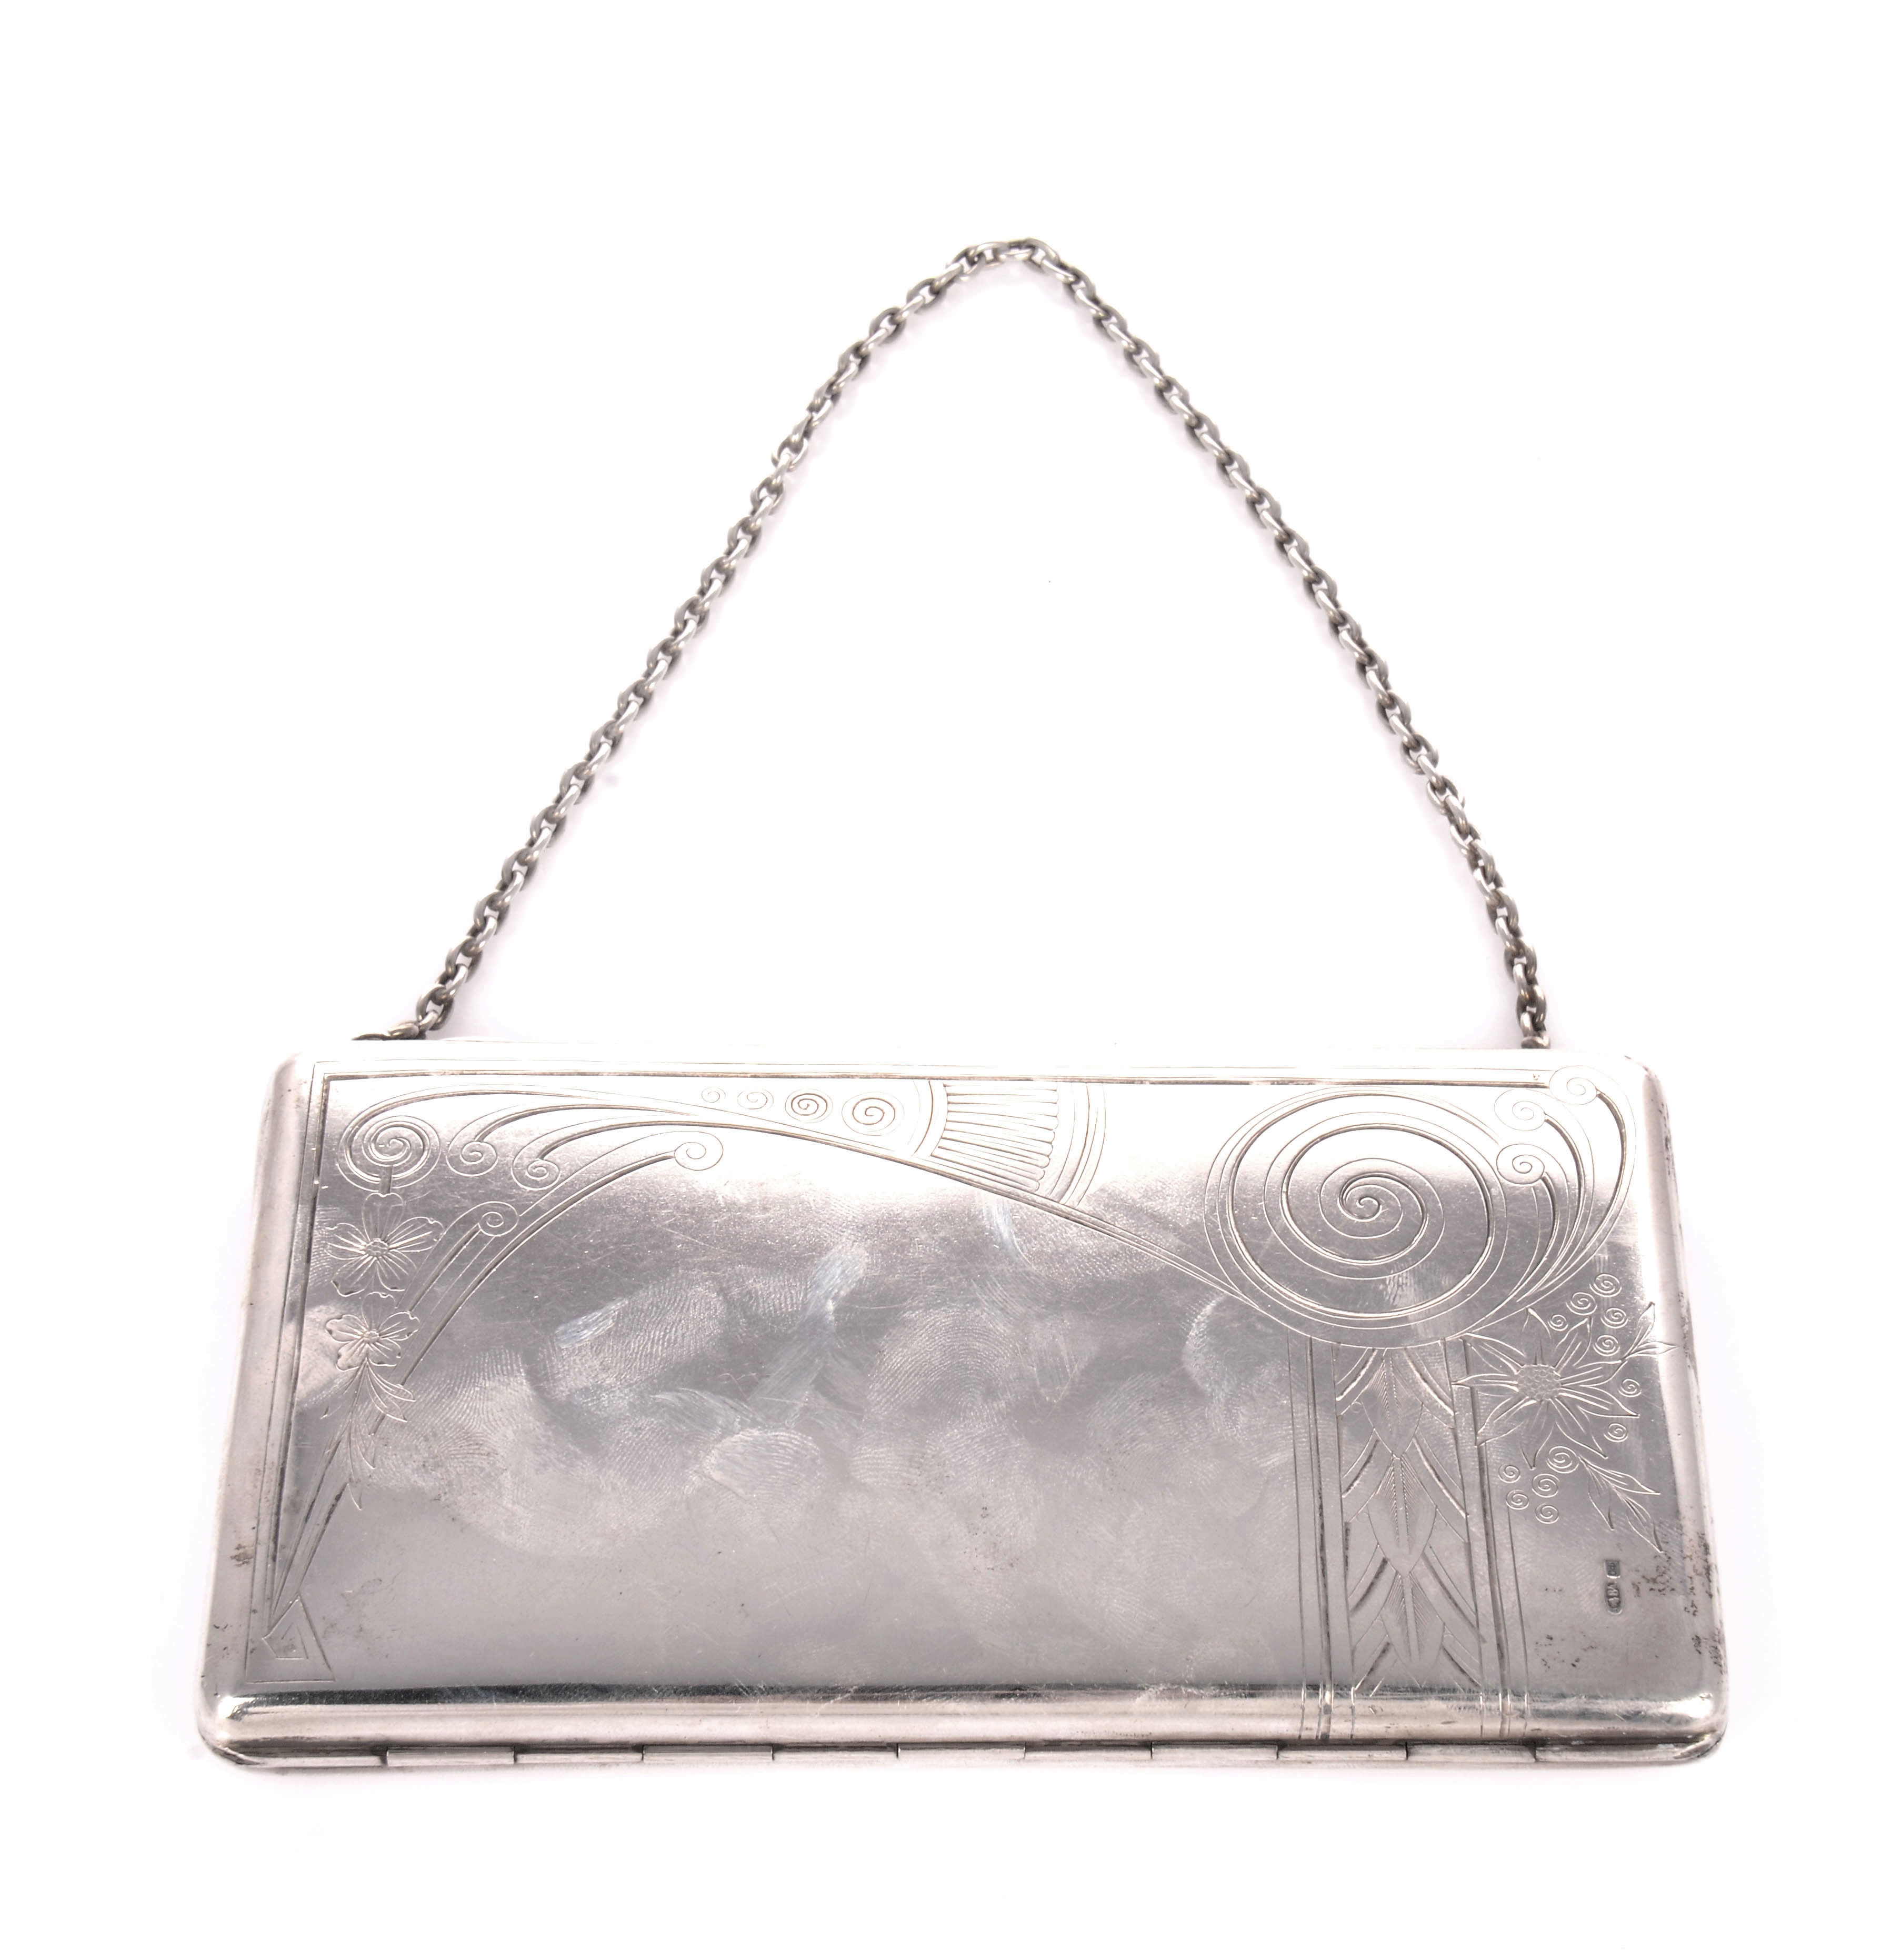 Art Deco School, 20th Century, Art Deco Russian silver ladies handbag,  Moscow, 1908 - 1926, the front engraved with an Art Deco graphic design,  287.7 grams